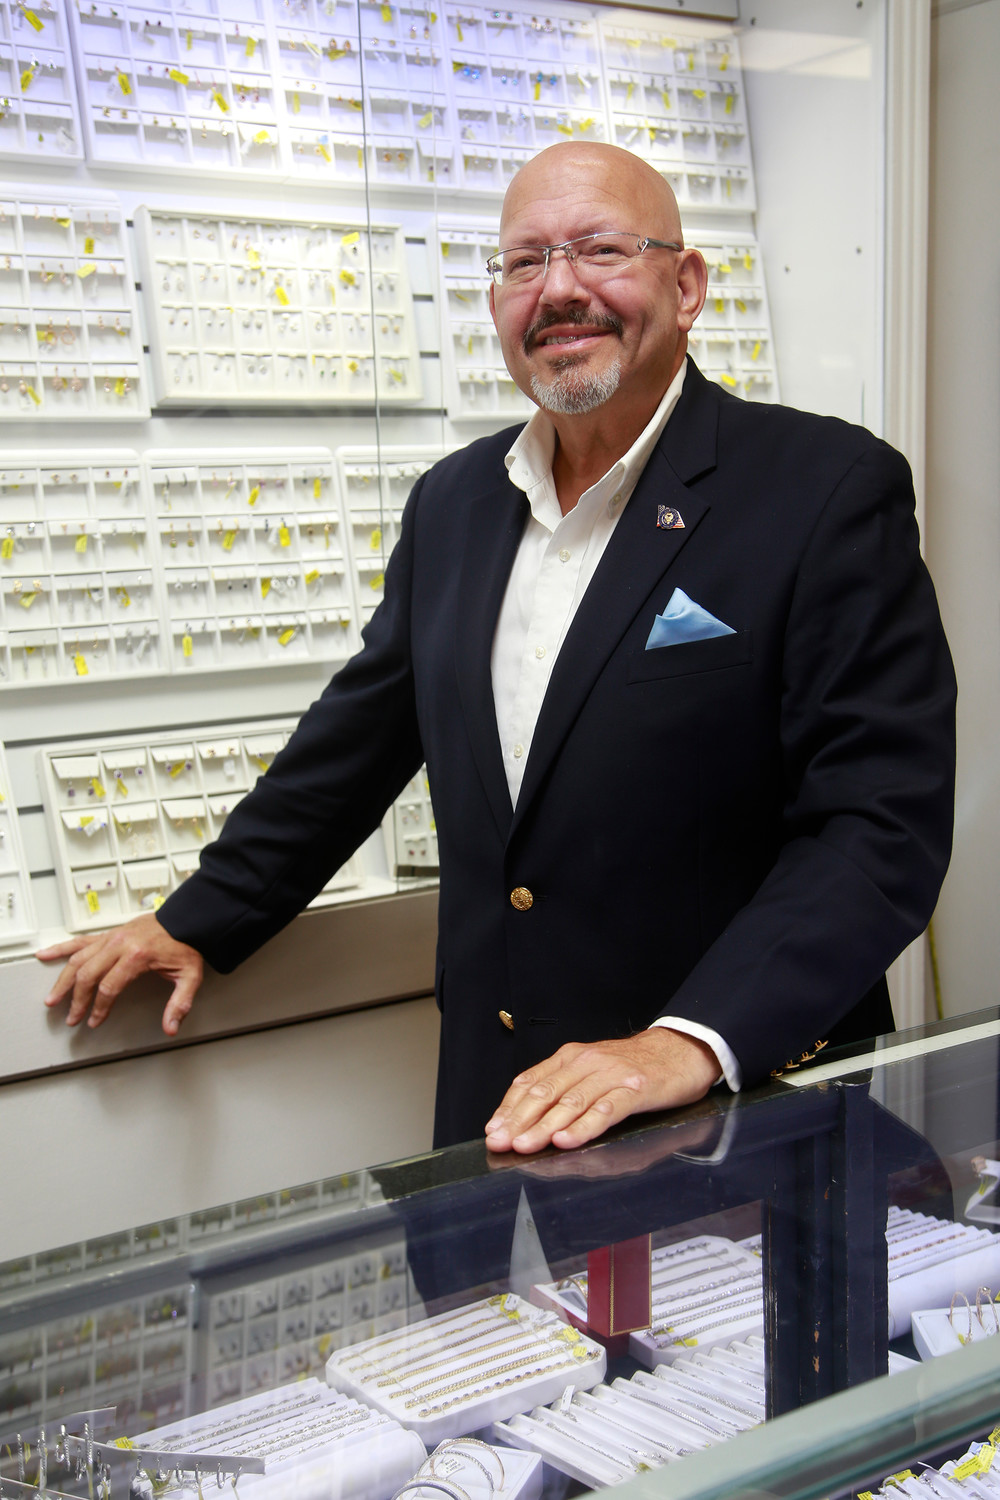 Gary Hudes is celebrating the 95th anniversary of Gennaro Jewelers.